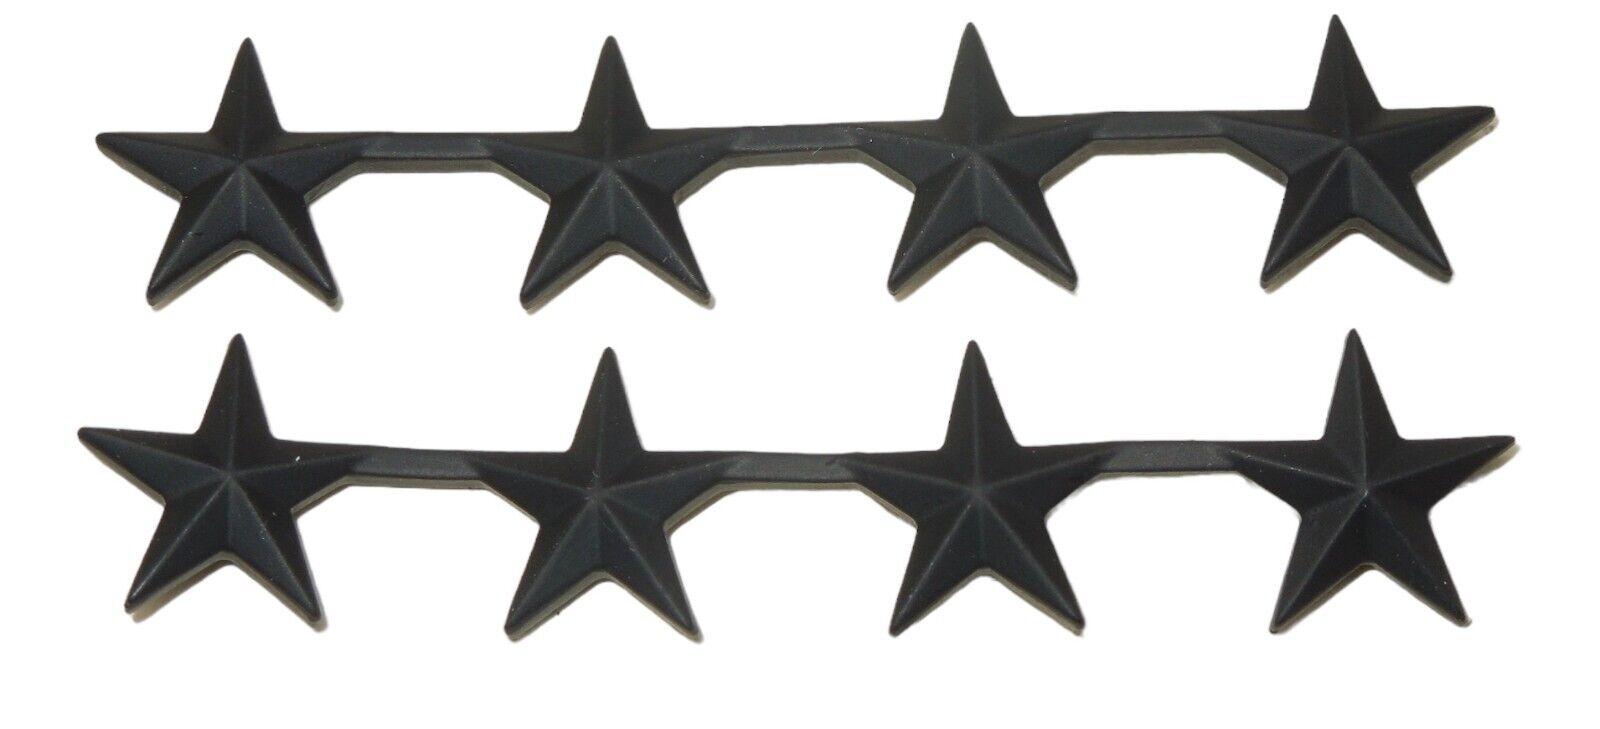 US Military Four Star General Subdued Collar Sized Stars Pins 1983 Dated on Card